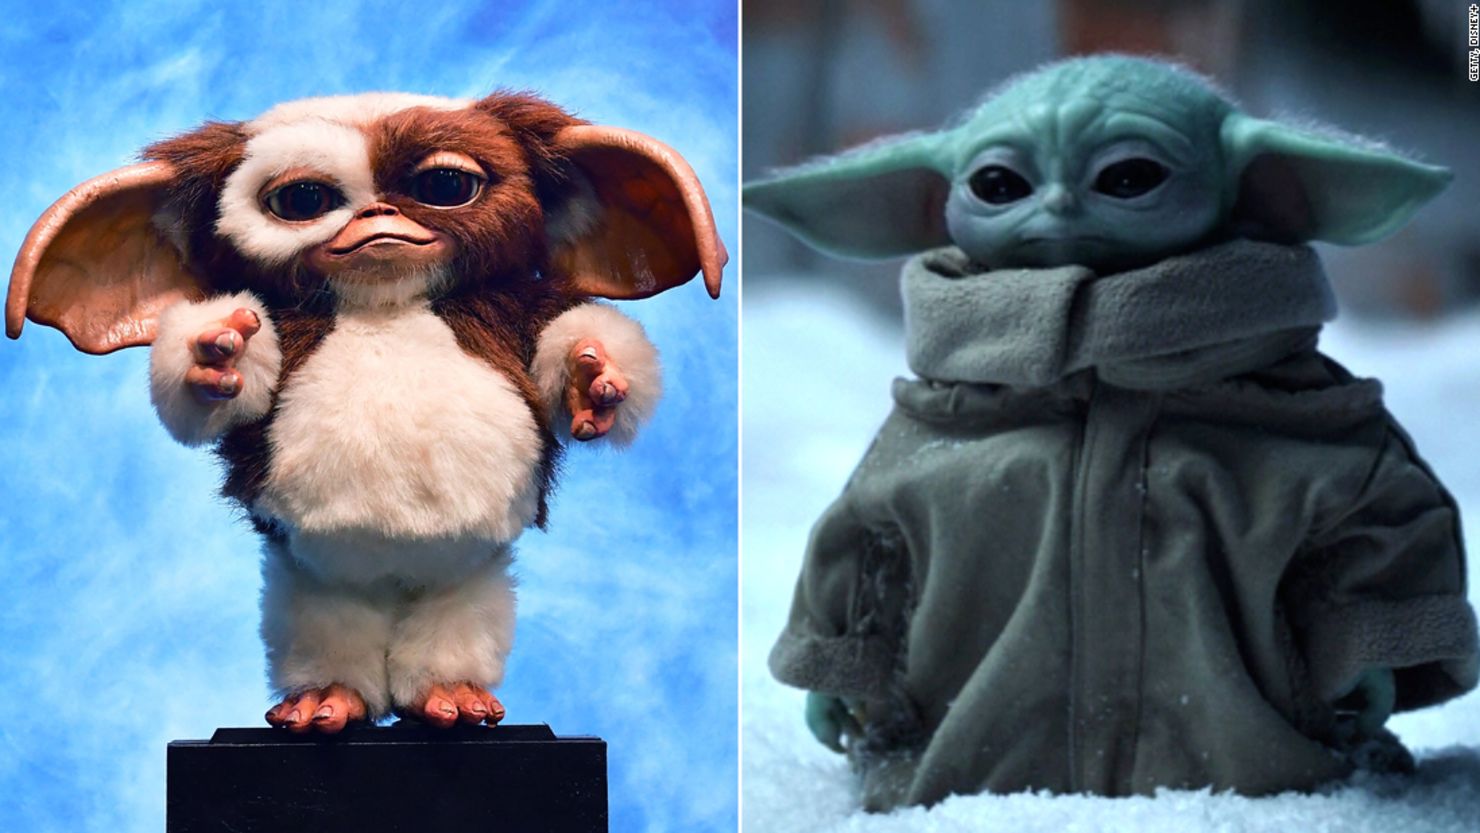 Gremlins' director thinks Baby Yoda'was copied from Gizmo the